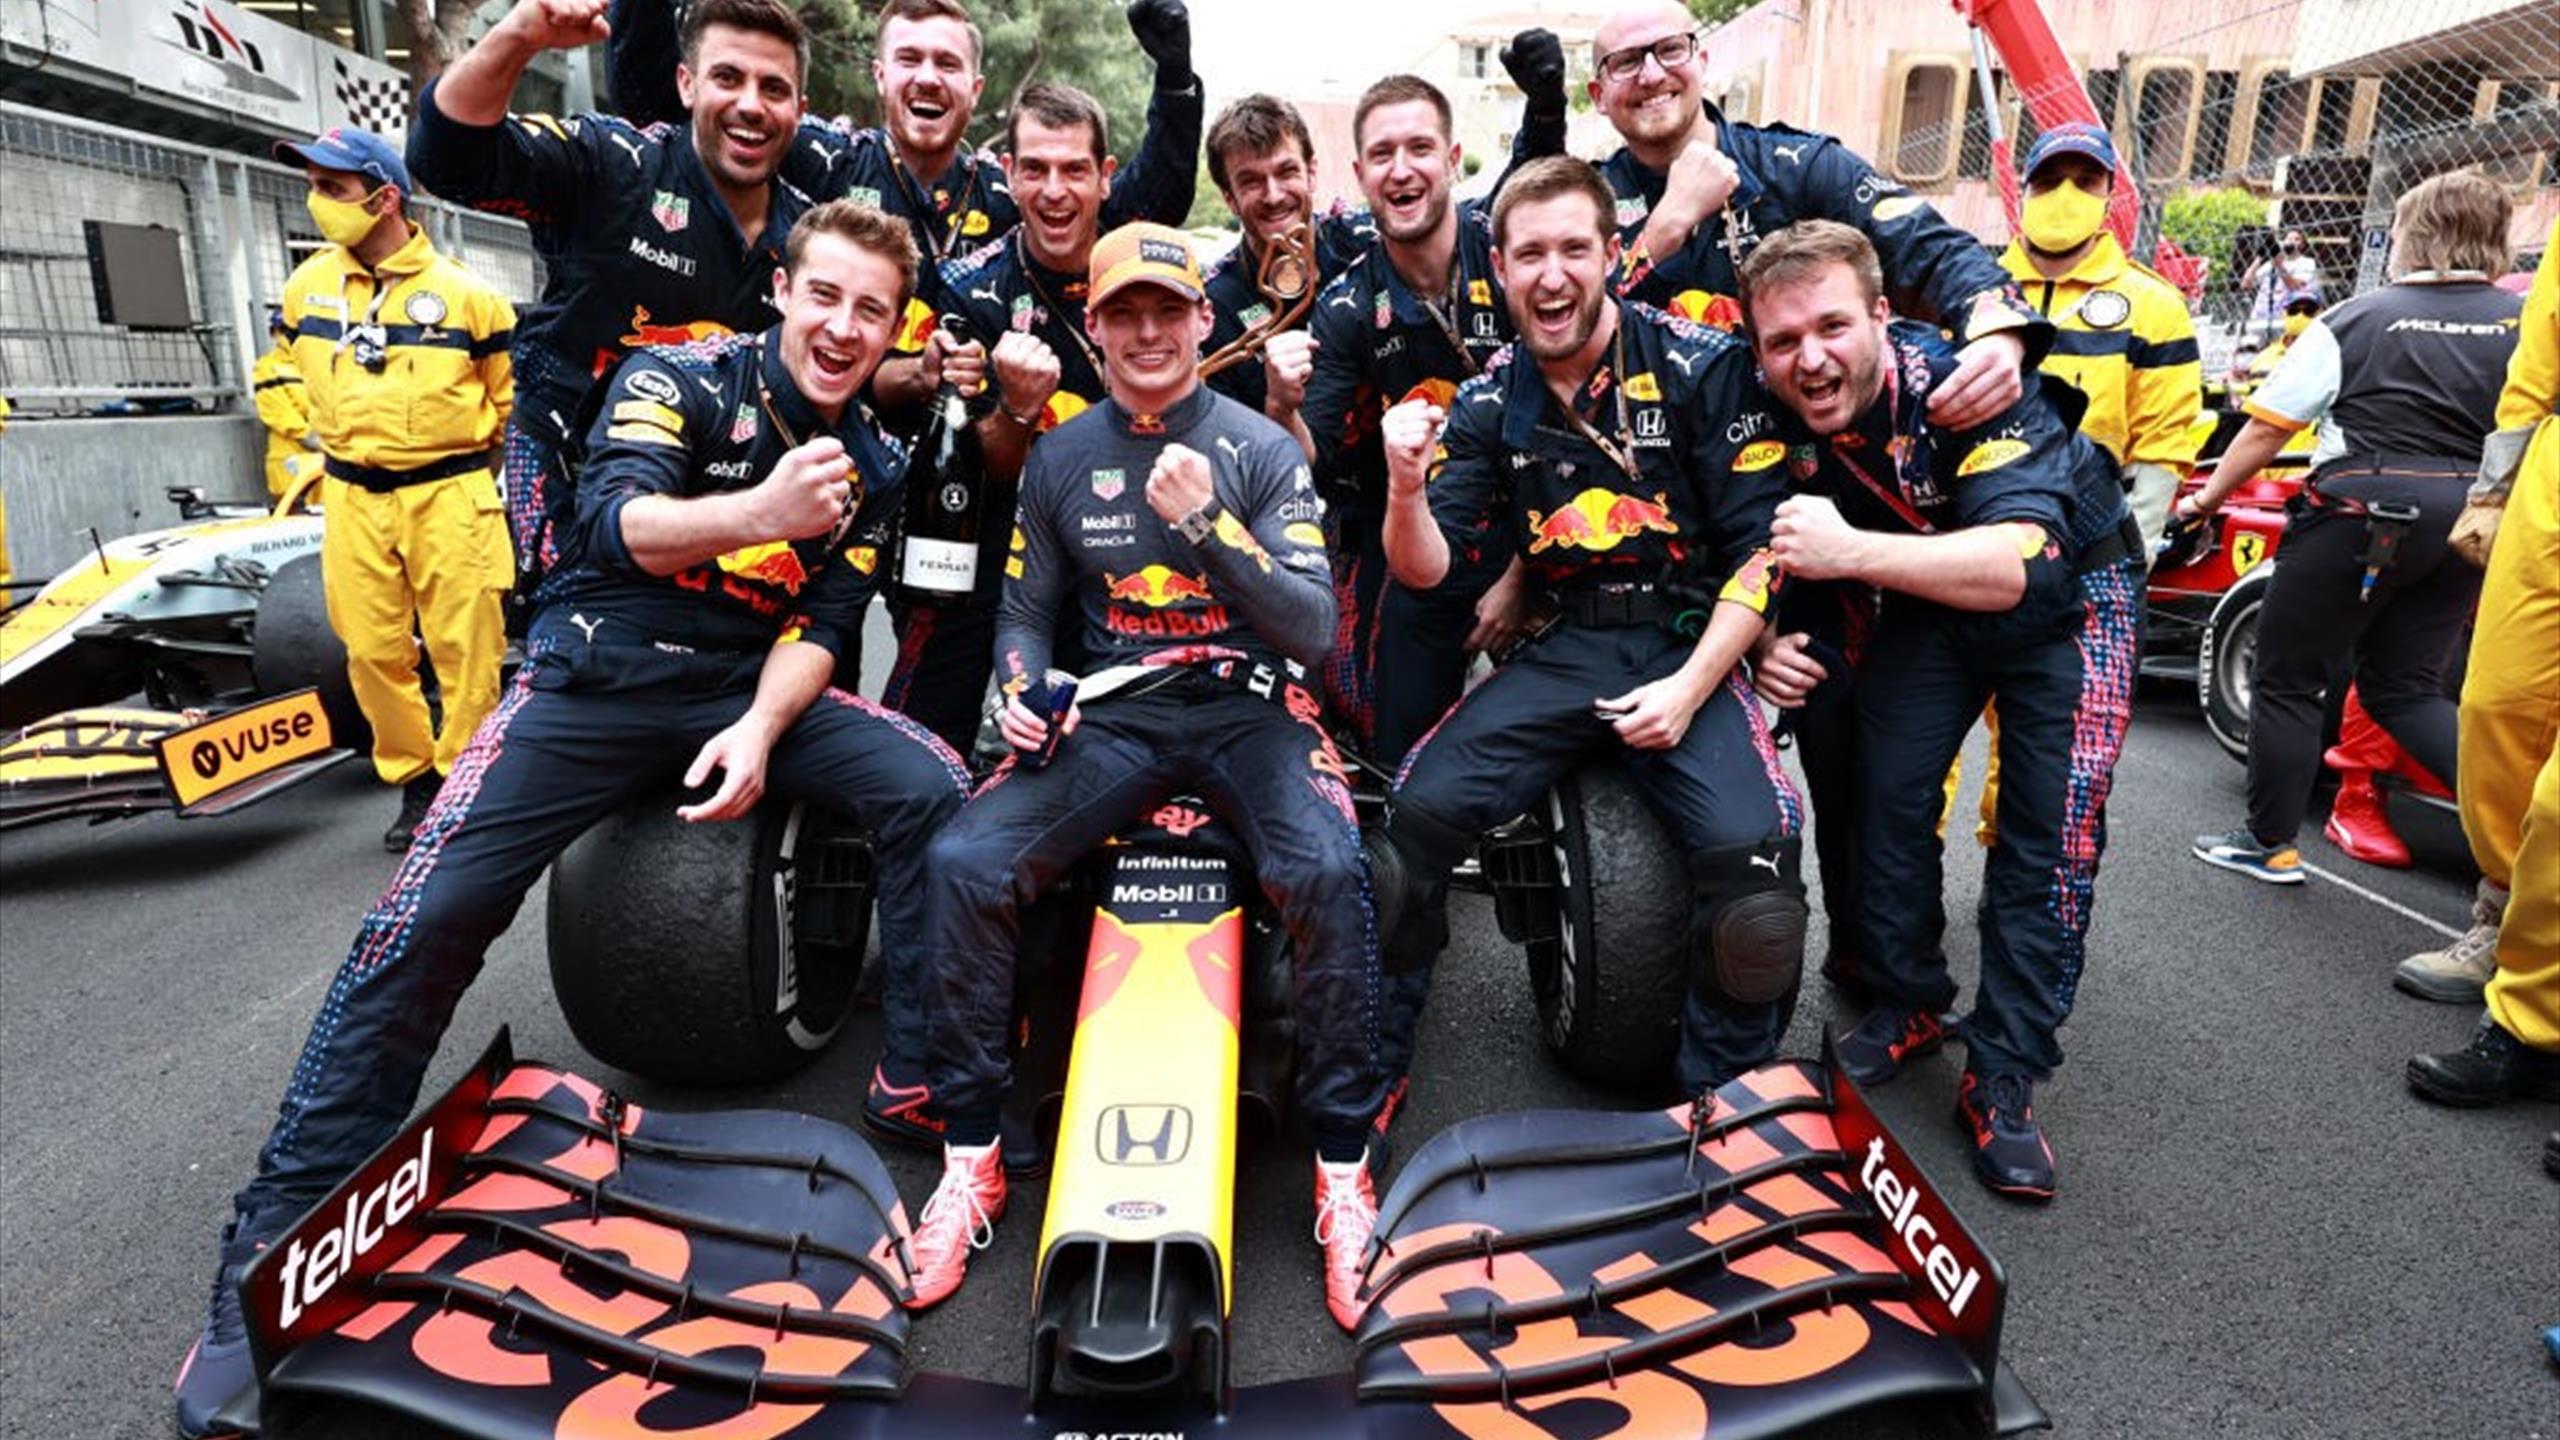 Monaco Grand Prix: Actions speak louder than words, says Max Verstappen in dig at Mercedes from Red Bull man